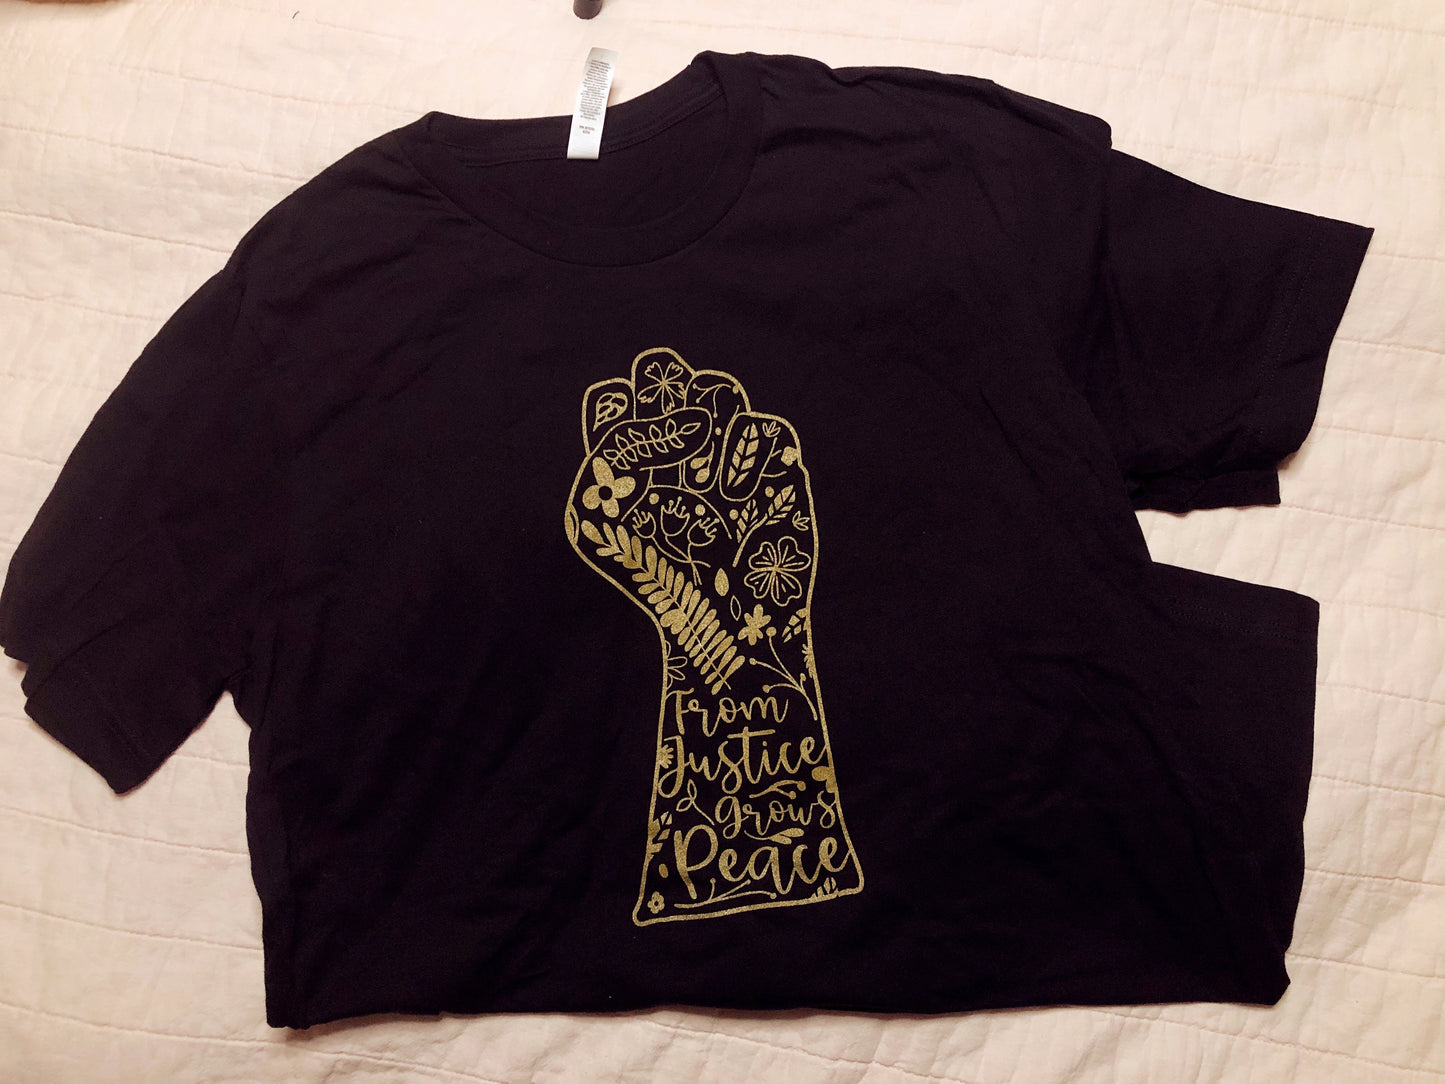 From Justice Grows Peace Black T-Shirt